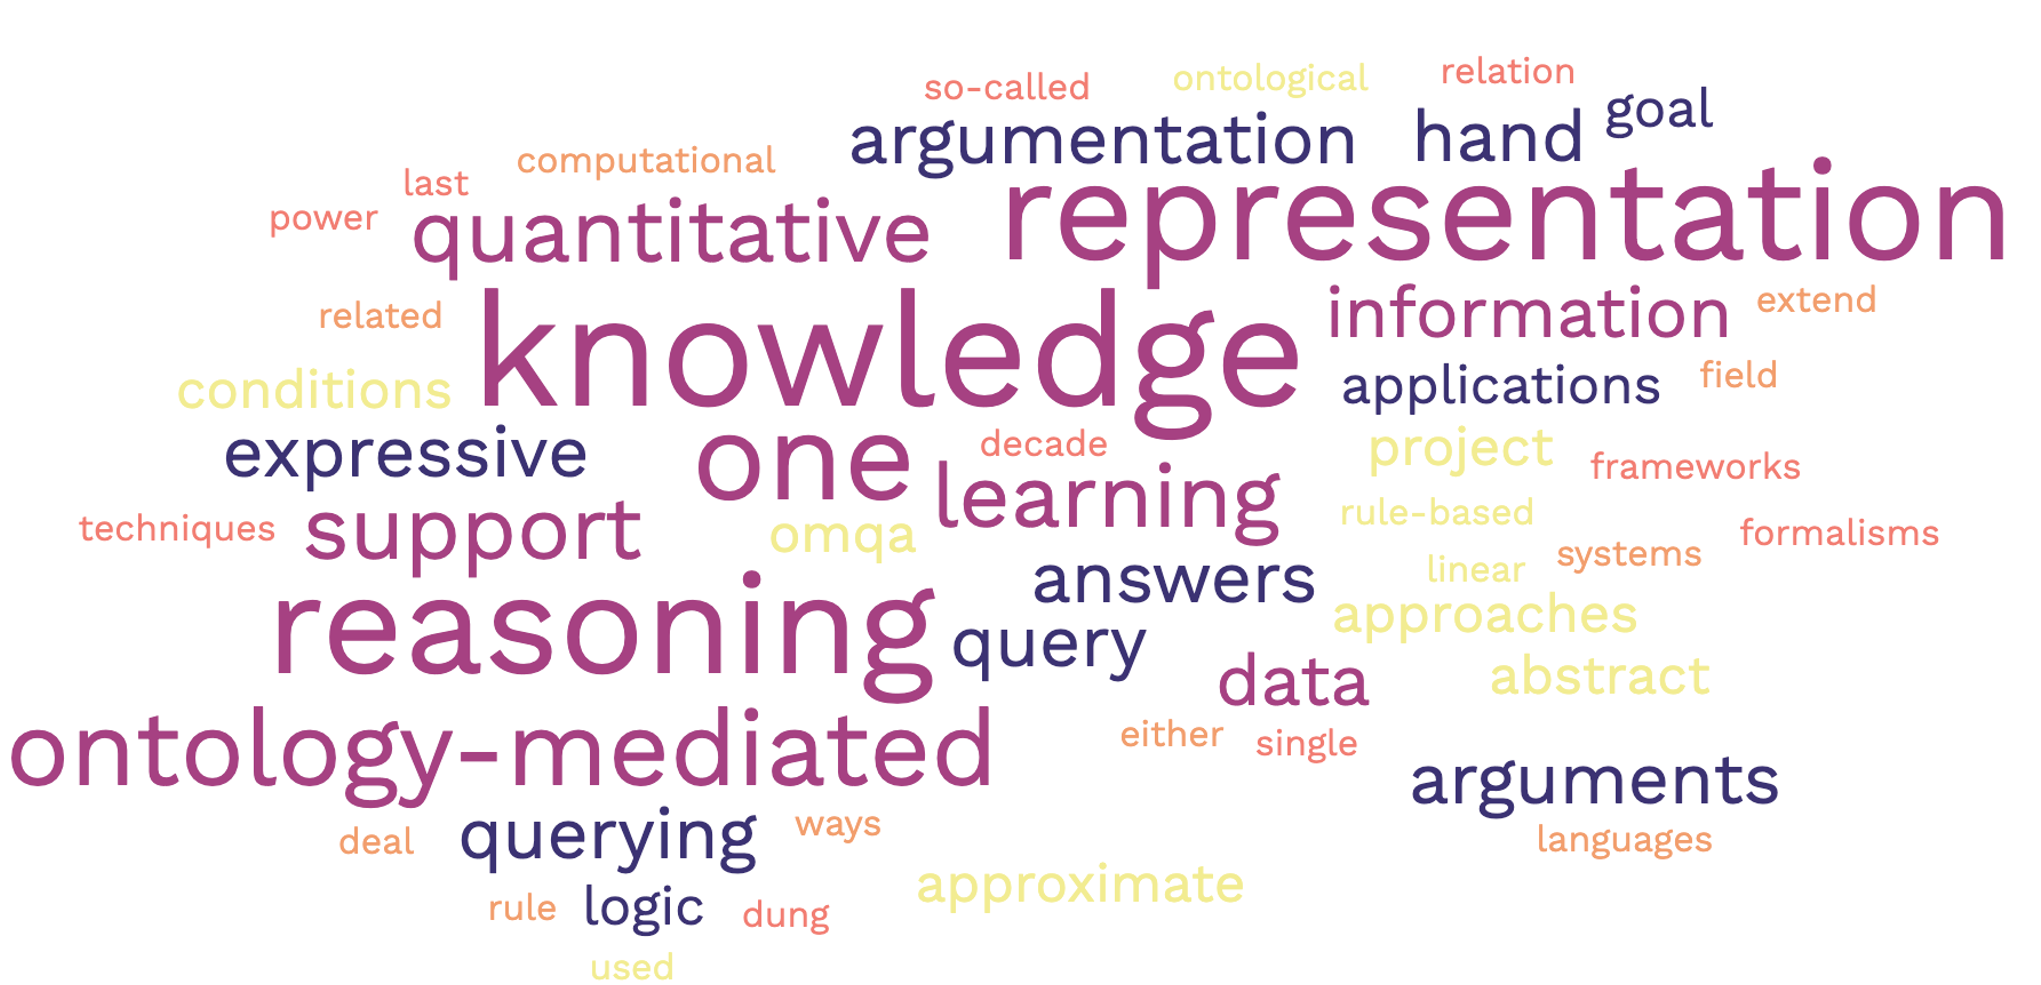 Word cloud for the topic area "Knowledge Representation and Engineering"